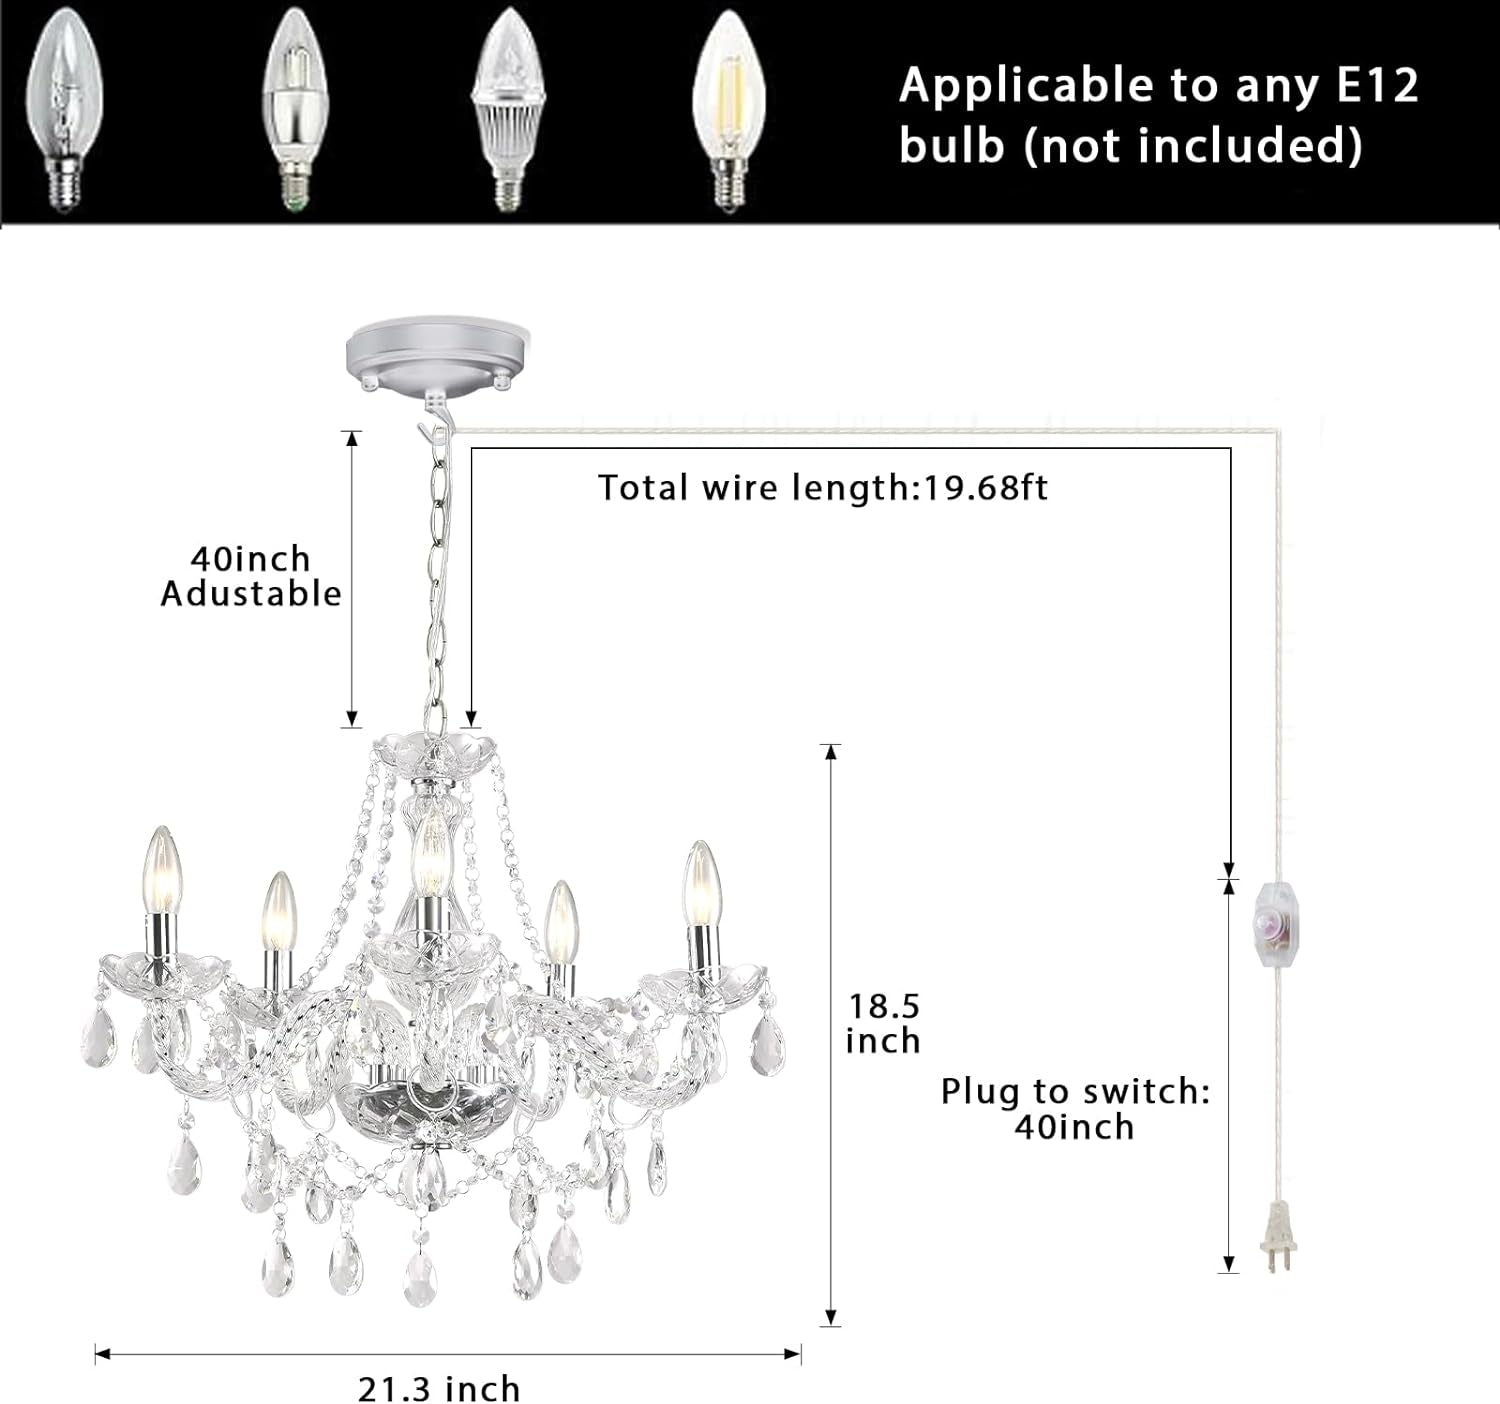 Dimmable Plug-In 5 Light Crystal Chandelier with Cord Glass, Chrome Candle Style Hanging Swag Lighting, K9 Crystals Beads Modern Pendant Light Fixtures Ceiling for Dining Living Room Bedroom